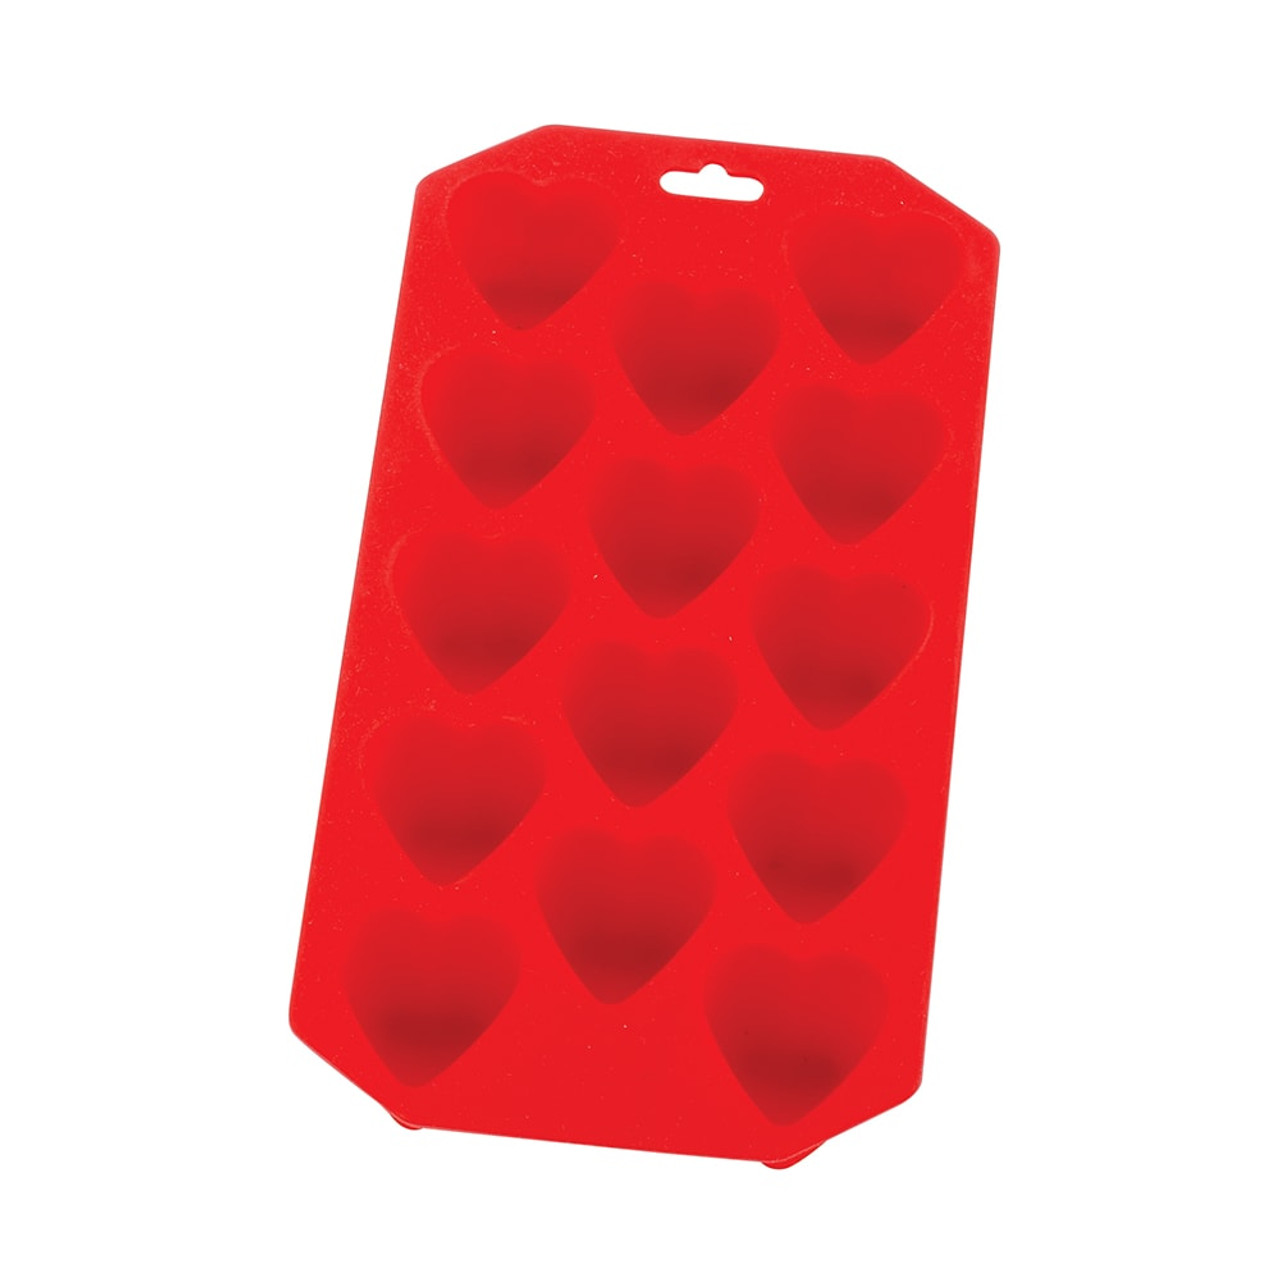 https://cdn11.bigcommerce.com/s-hccytny0od/images/stencil/1280x1280/products/2609/9160/silicone-ice-tray-mold-heart__45313.1587500279.jpg?c=2?imbypass=on